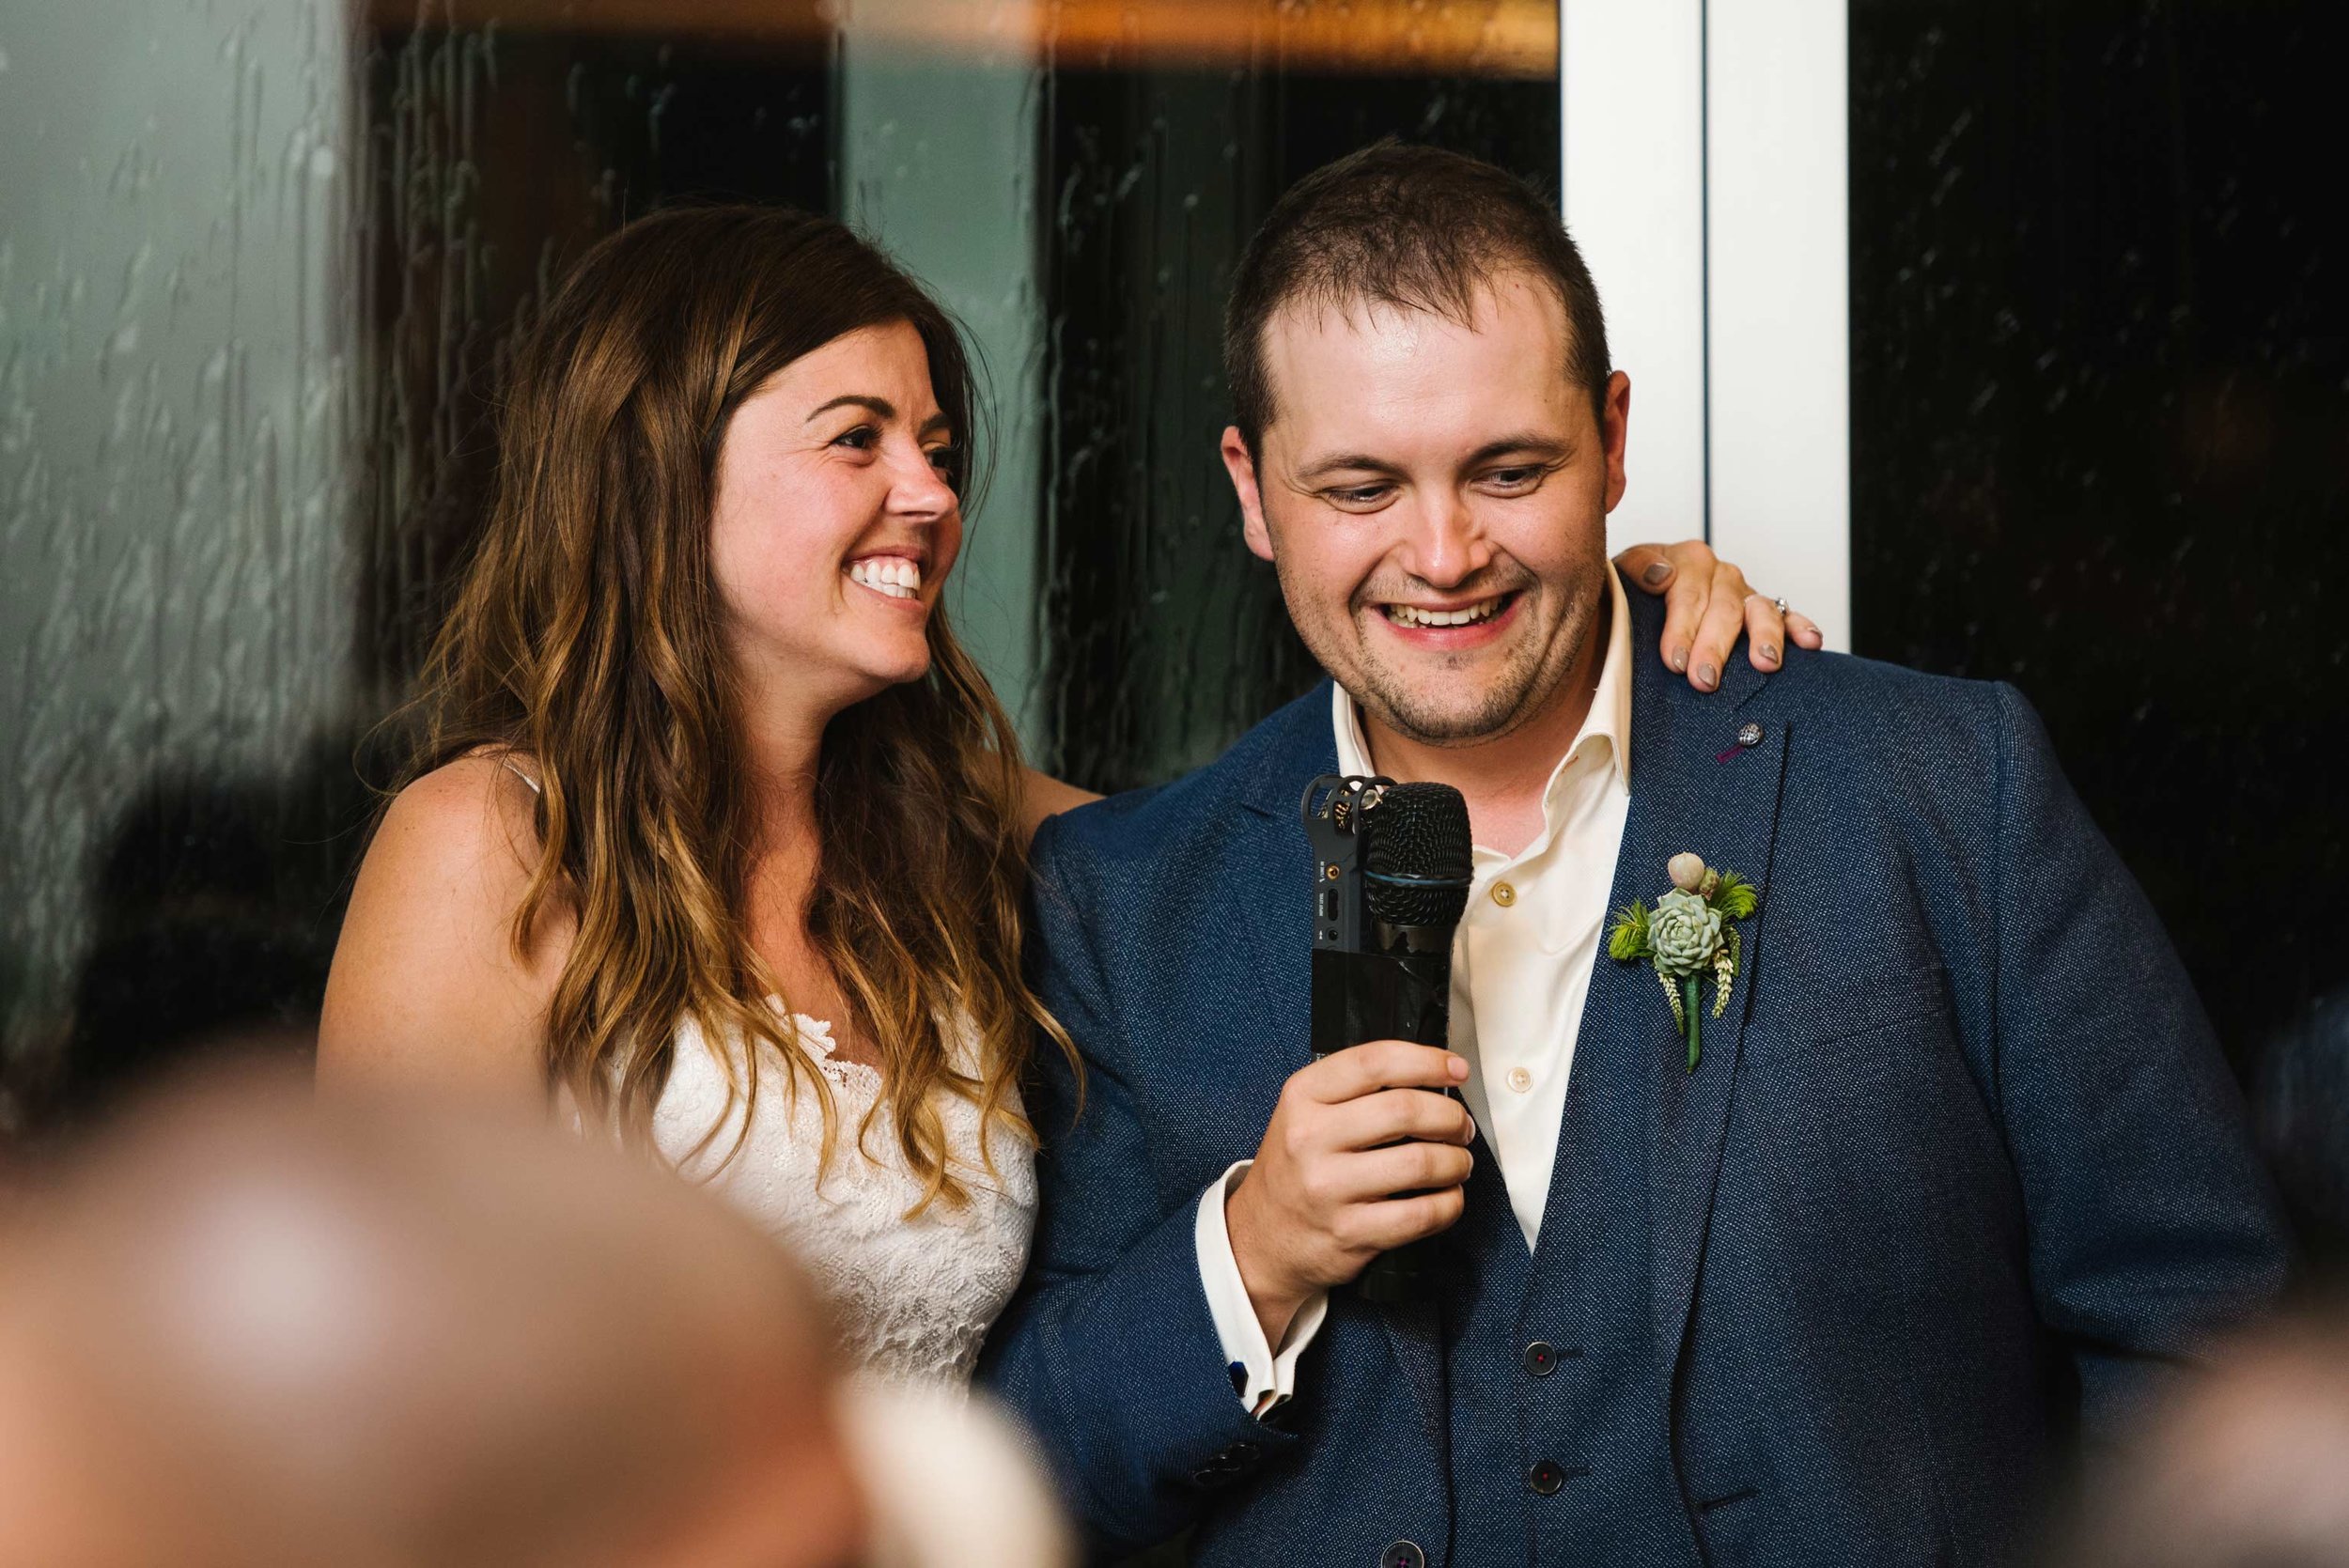 Newlyweds laughing during speeches